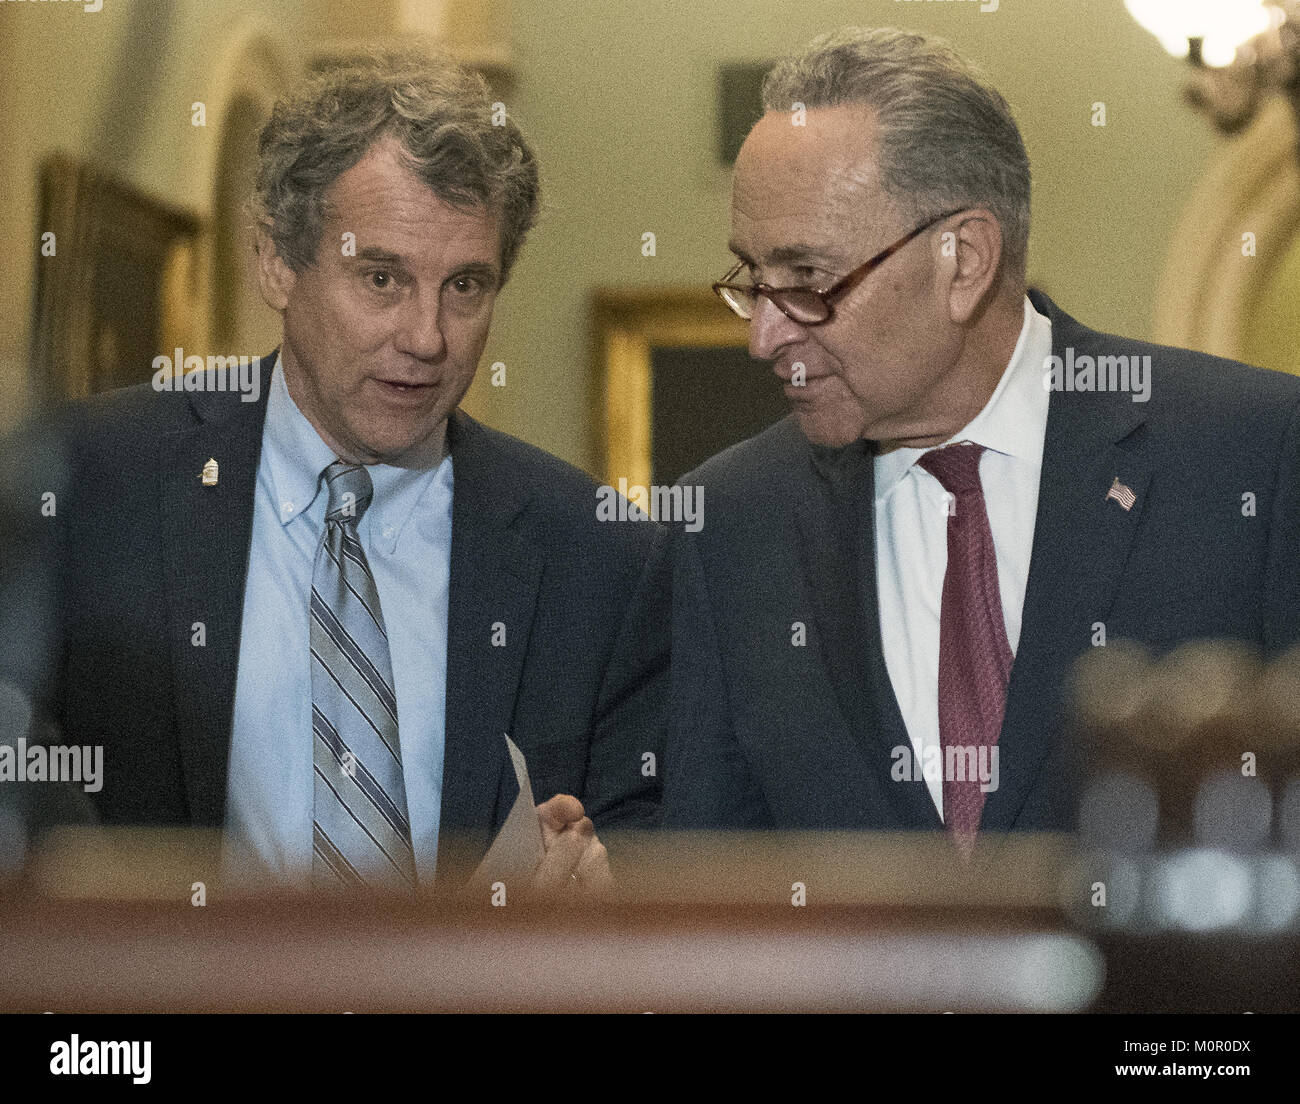 Washington, District of Columbia, USA. 23rd Jan, 2018. United States Senate Majority Leader Chuck Schumer (Democrat of New York), right, US Senator Sherrod Brown (Democrat of Ohio), left, speak prior to making remarks following the Democratic Party policy luncheon in the US Capitol in Washington, DC on Tuesday, January 23, 2018.Credit: Ron Sachs/CNP Credit: Ron Sachs/CNP/ZUMA Wire/Alamy Live News Stock Photo